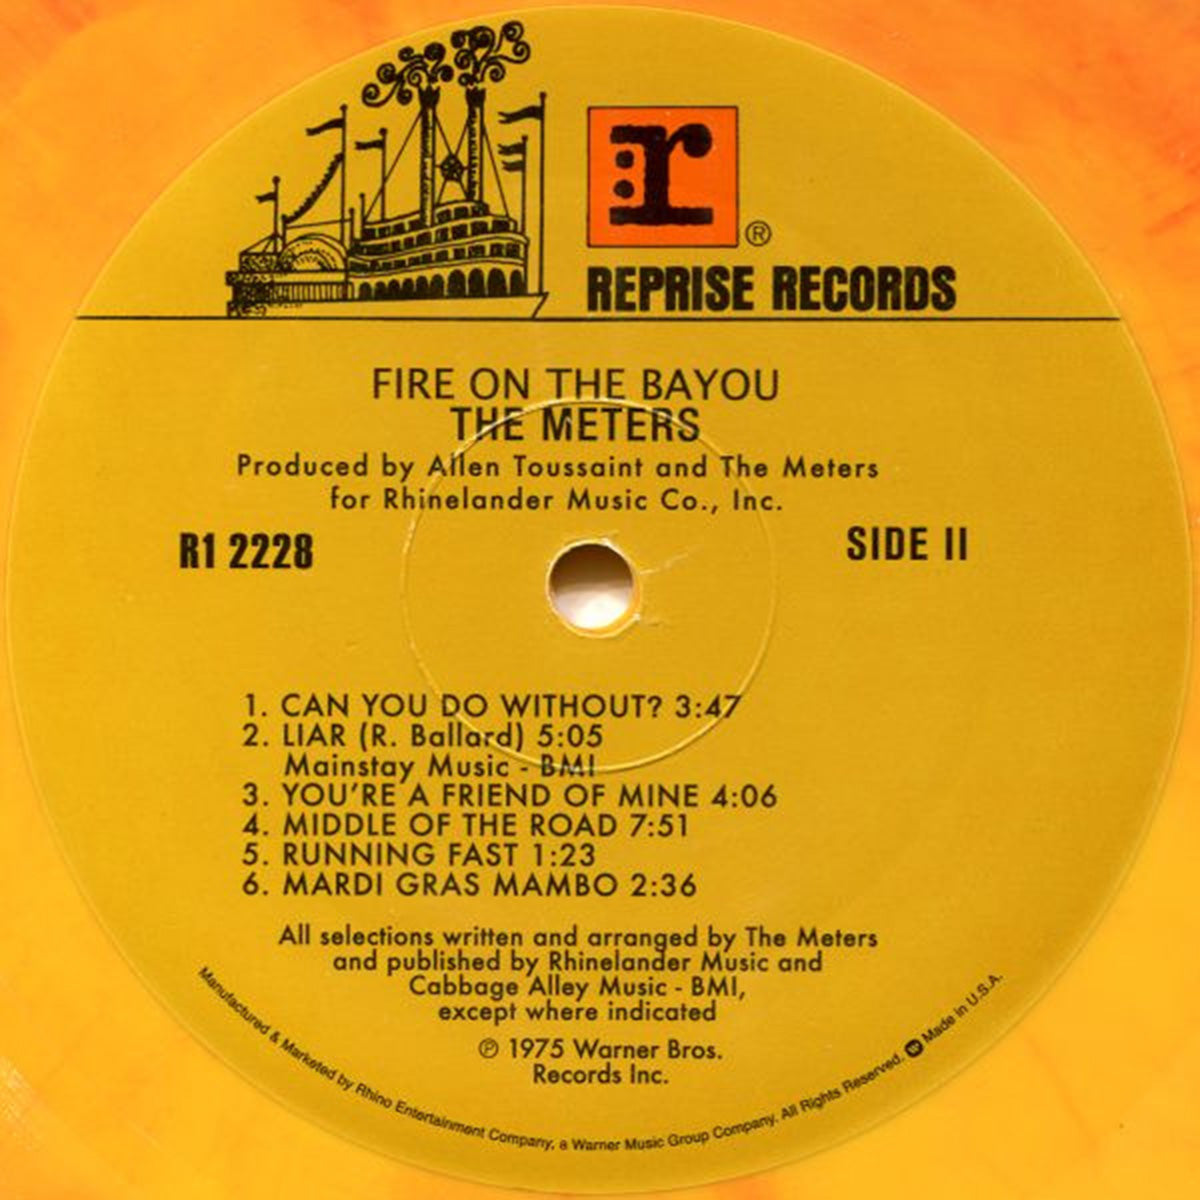 The Meters – Fire On The Bayou - LIMITED EDITION FIRE VINYL